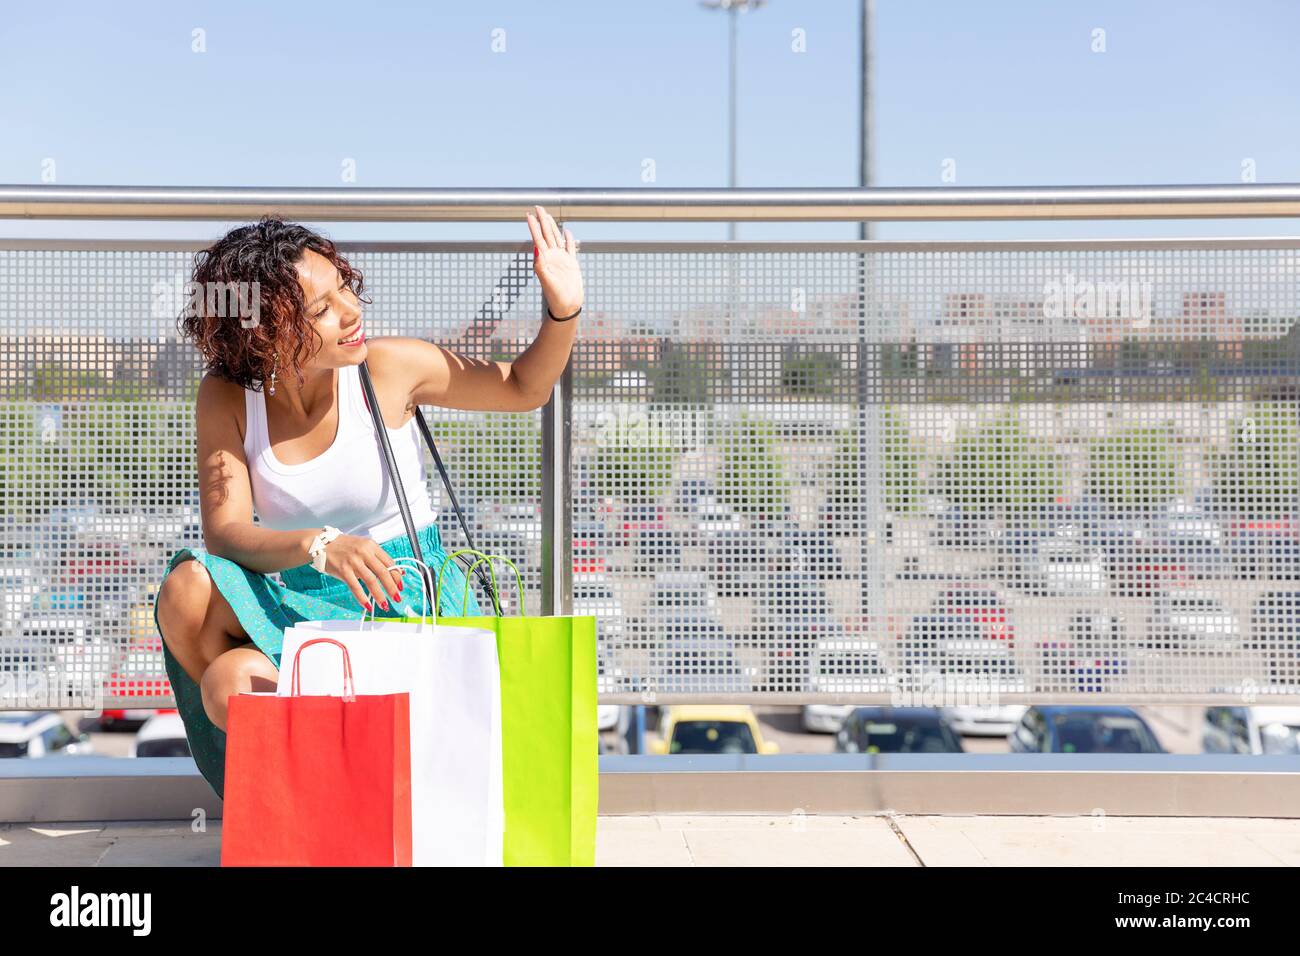 Young woman with exotic features greets with her hand at the entrance of a shopping center. Space for text. Stock Photo